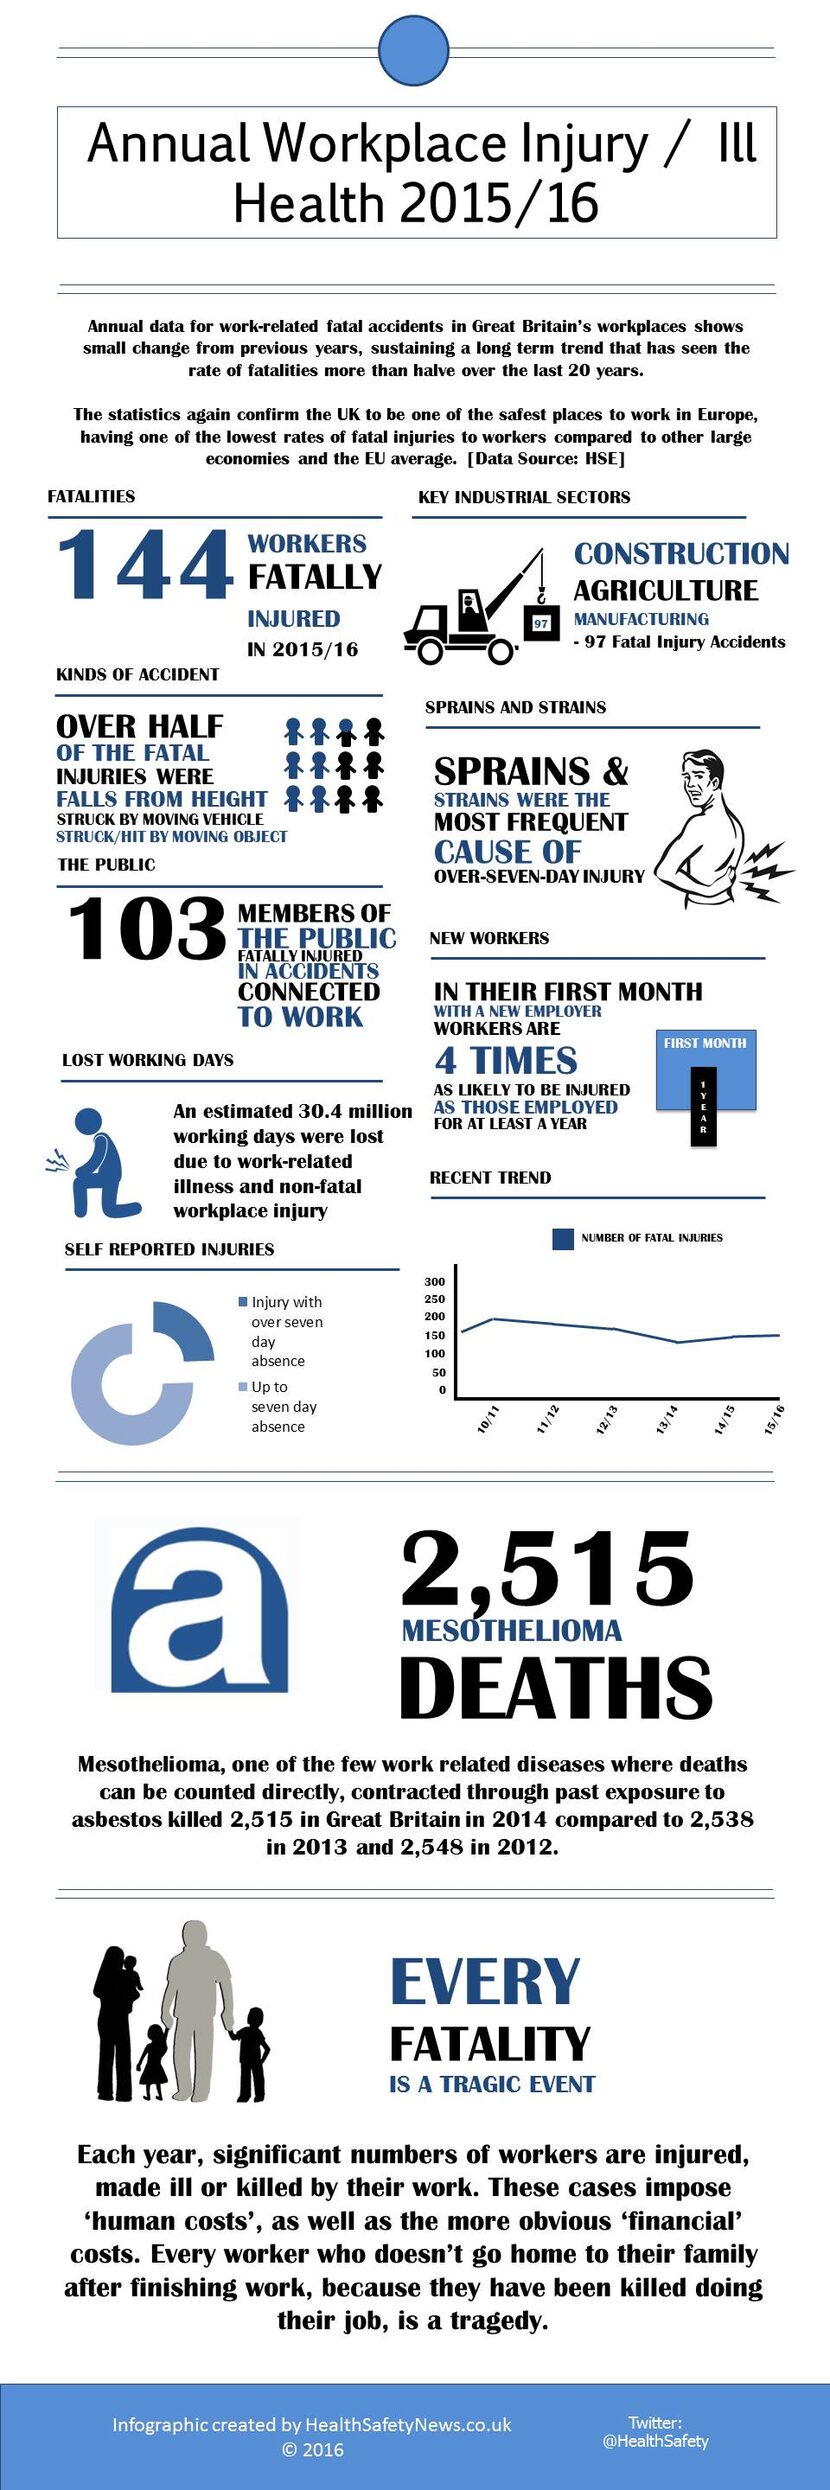 safety and health infographic showing workplace injury and ill-health statistics for 2015/16